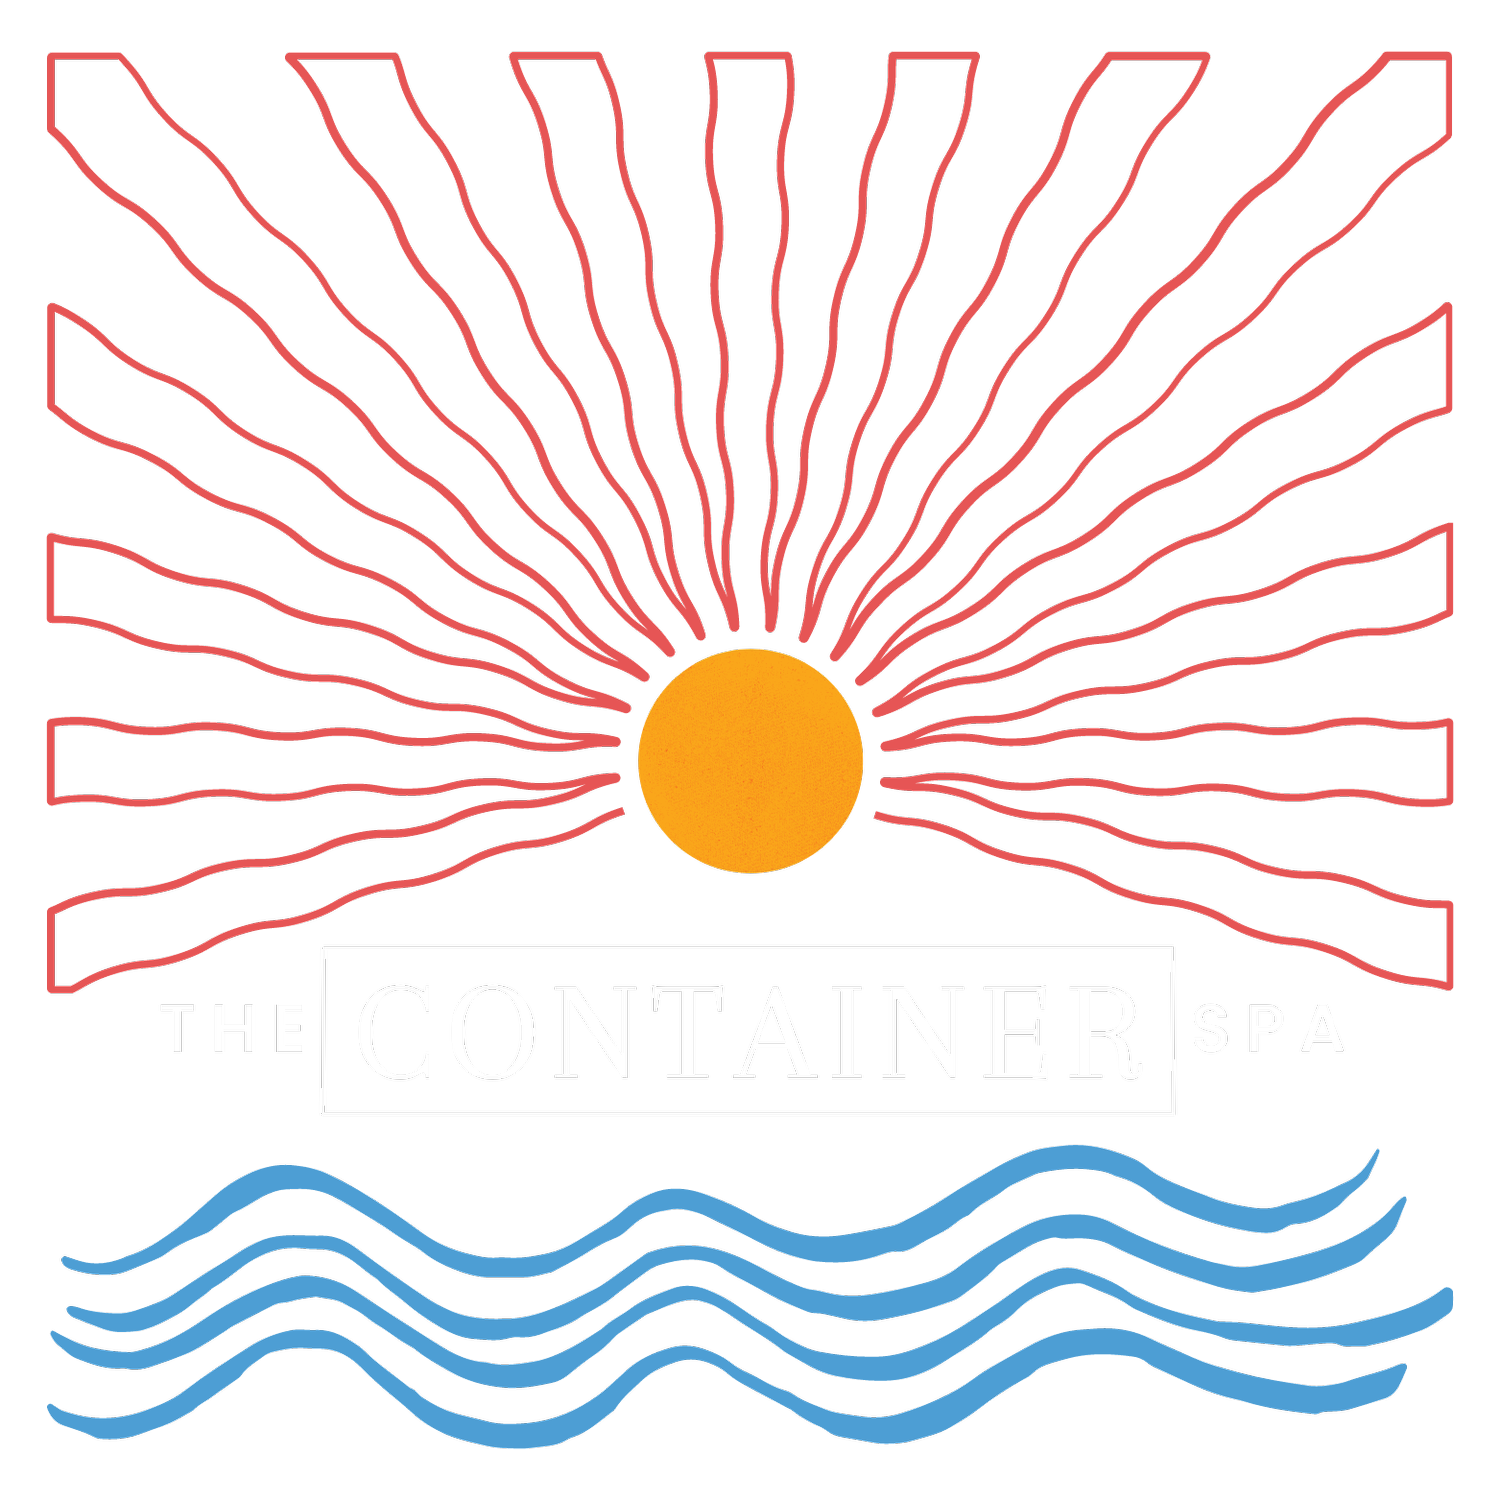 The Container Spa